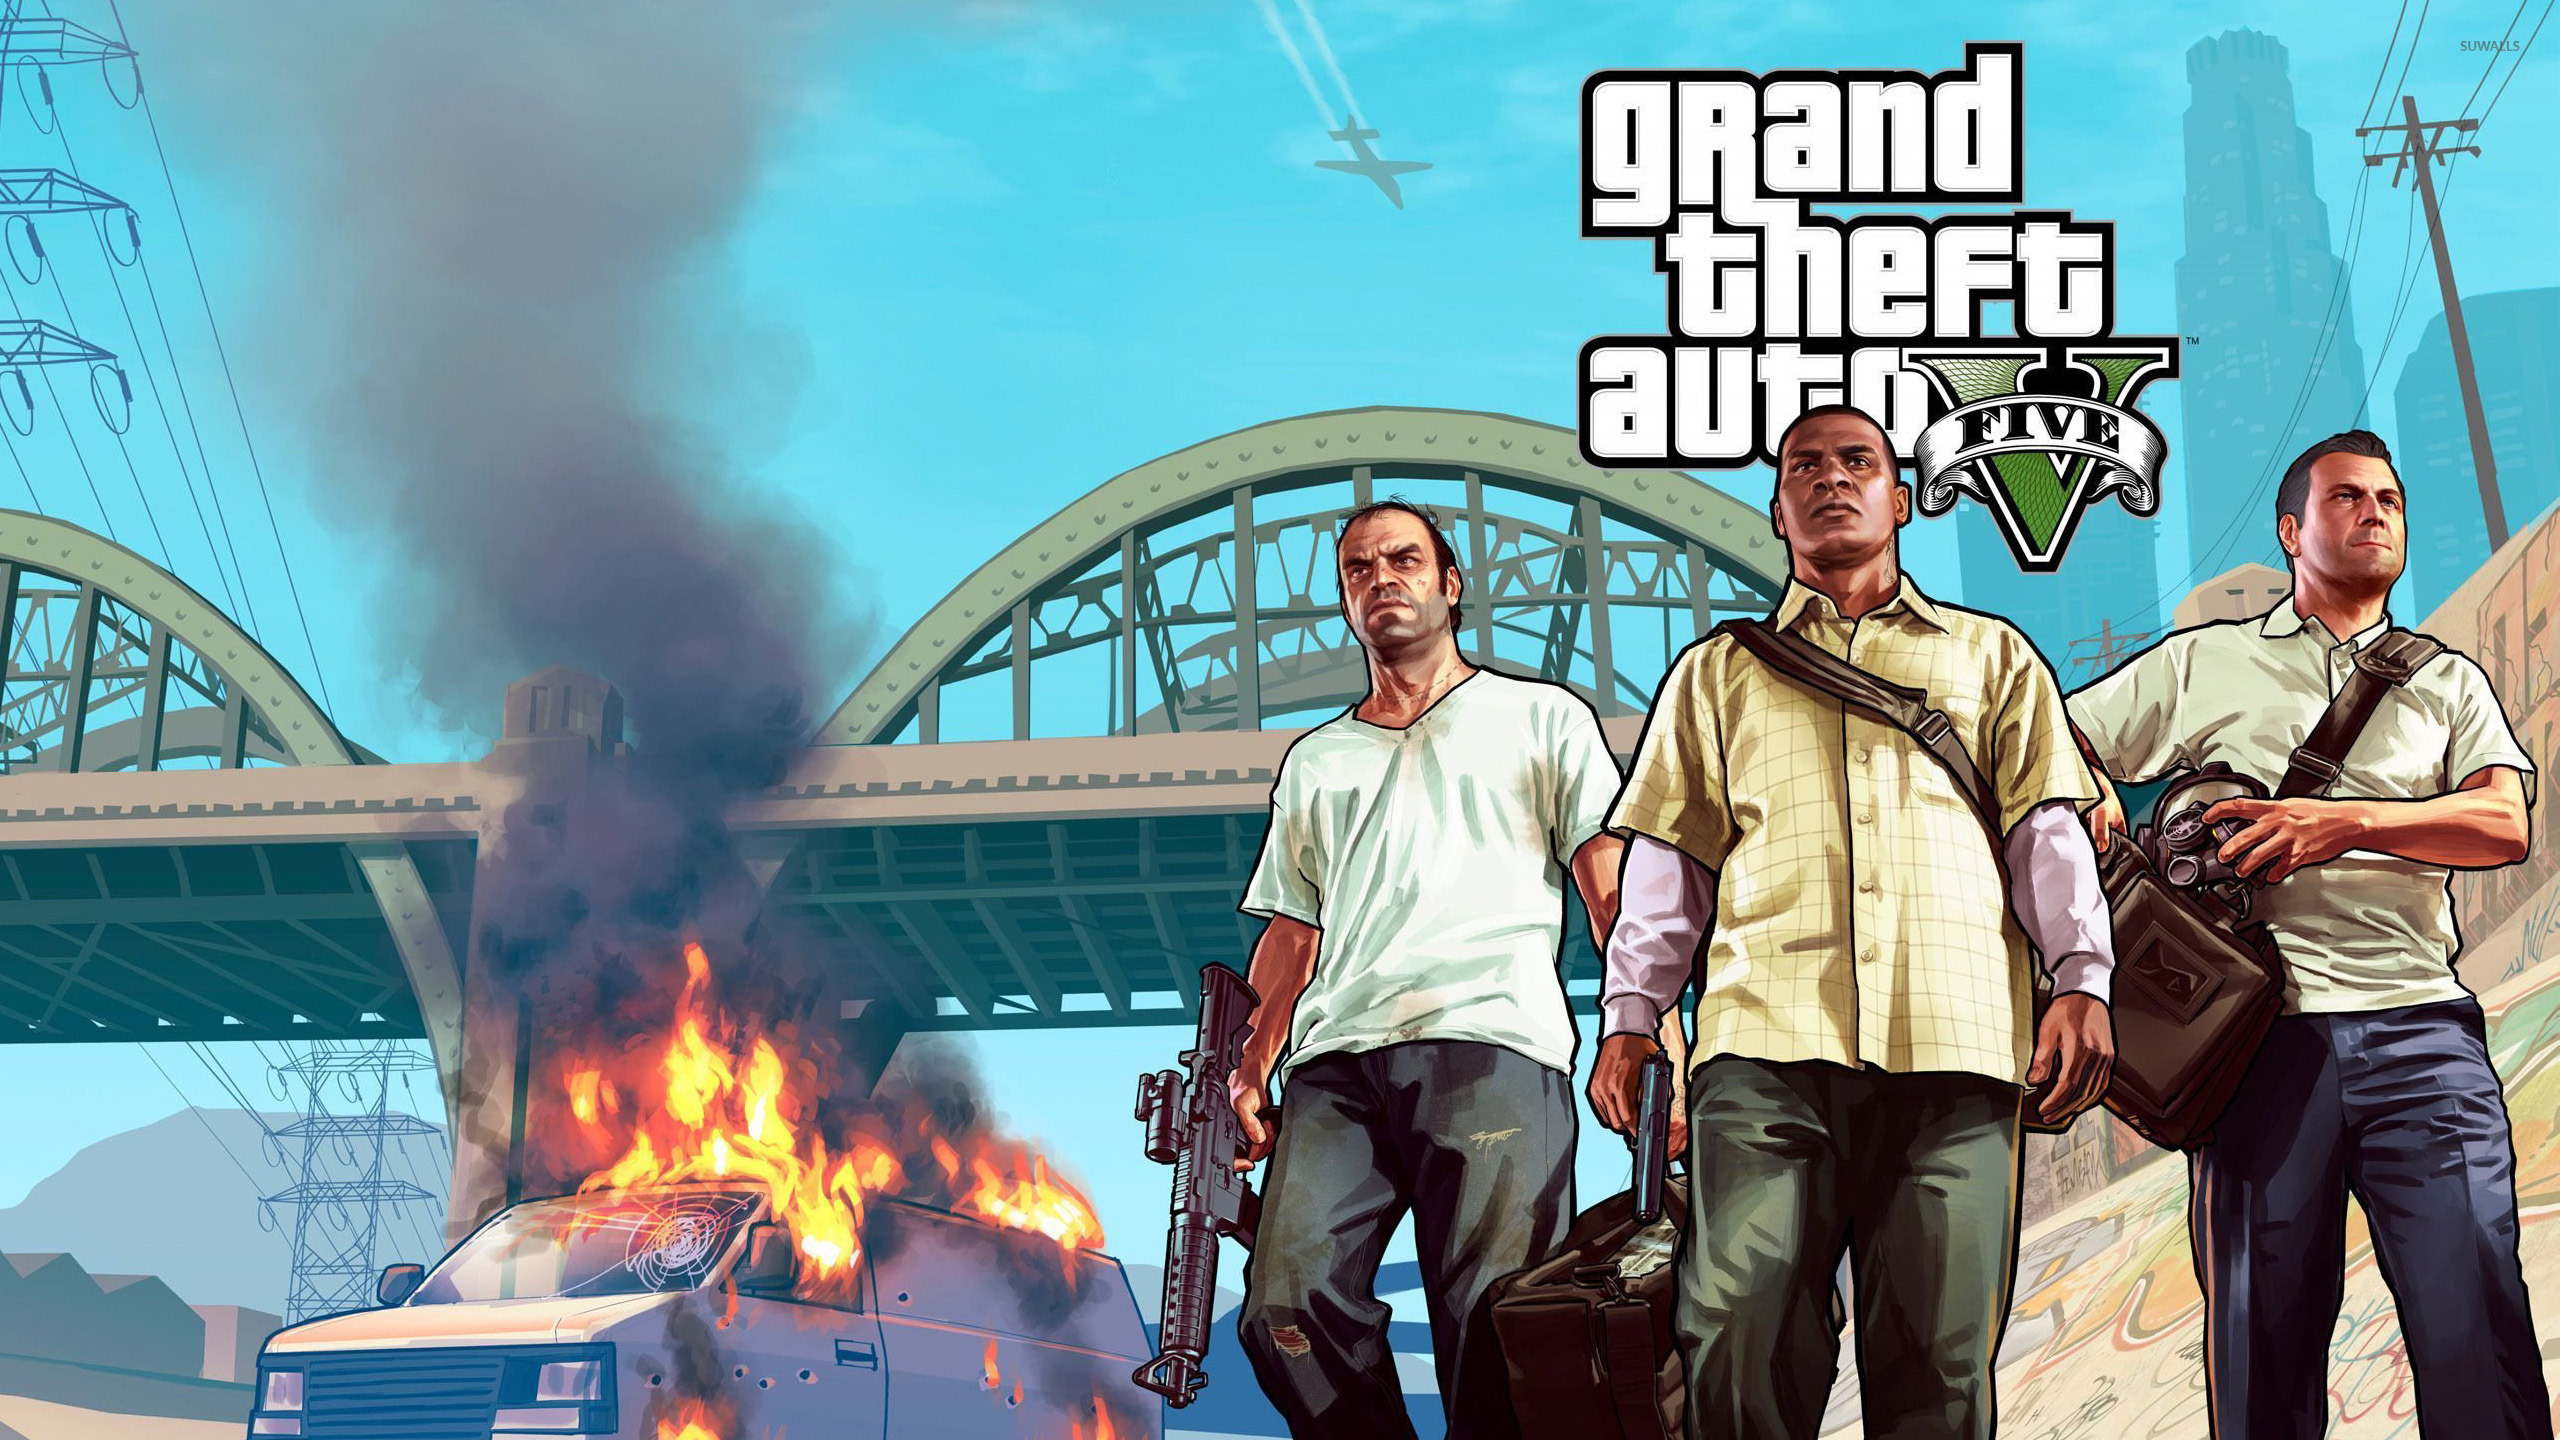 Grand Theft Auto V wallpaper Game wallpapers 